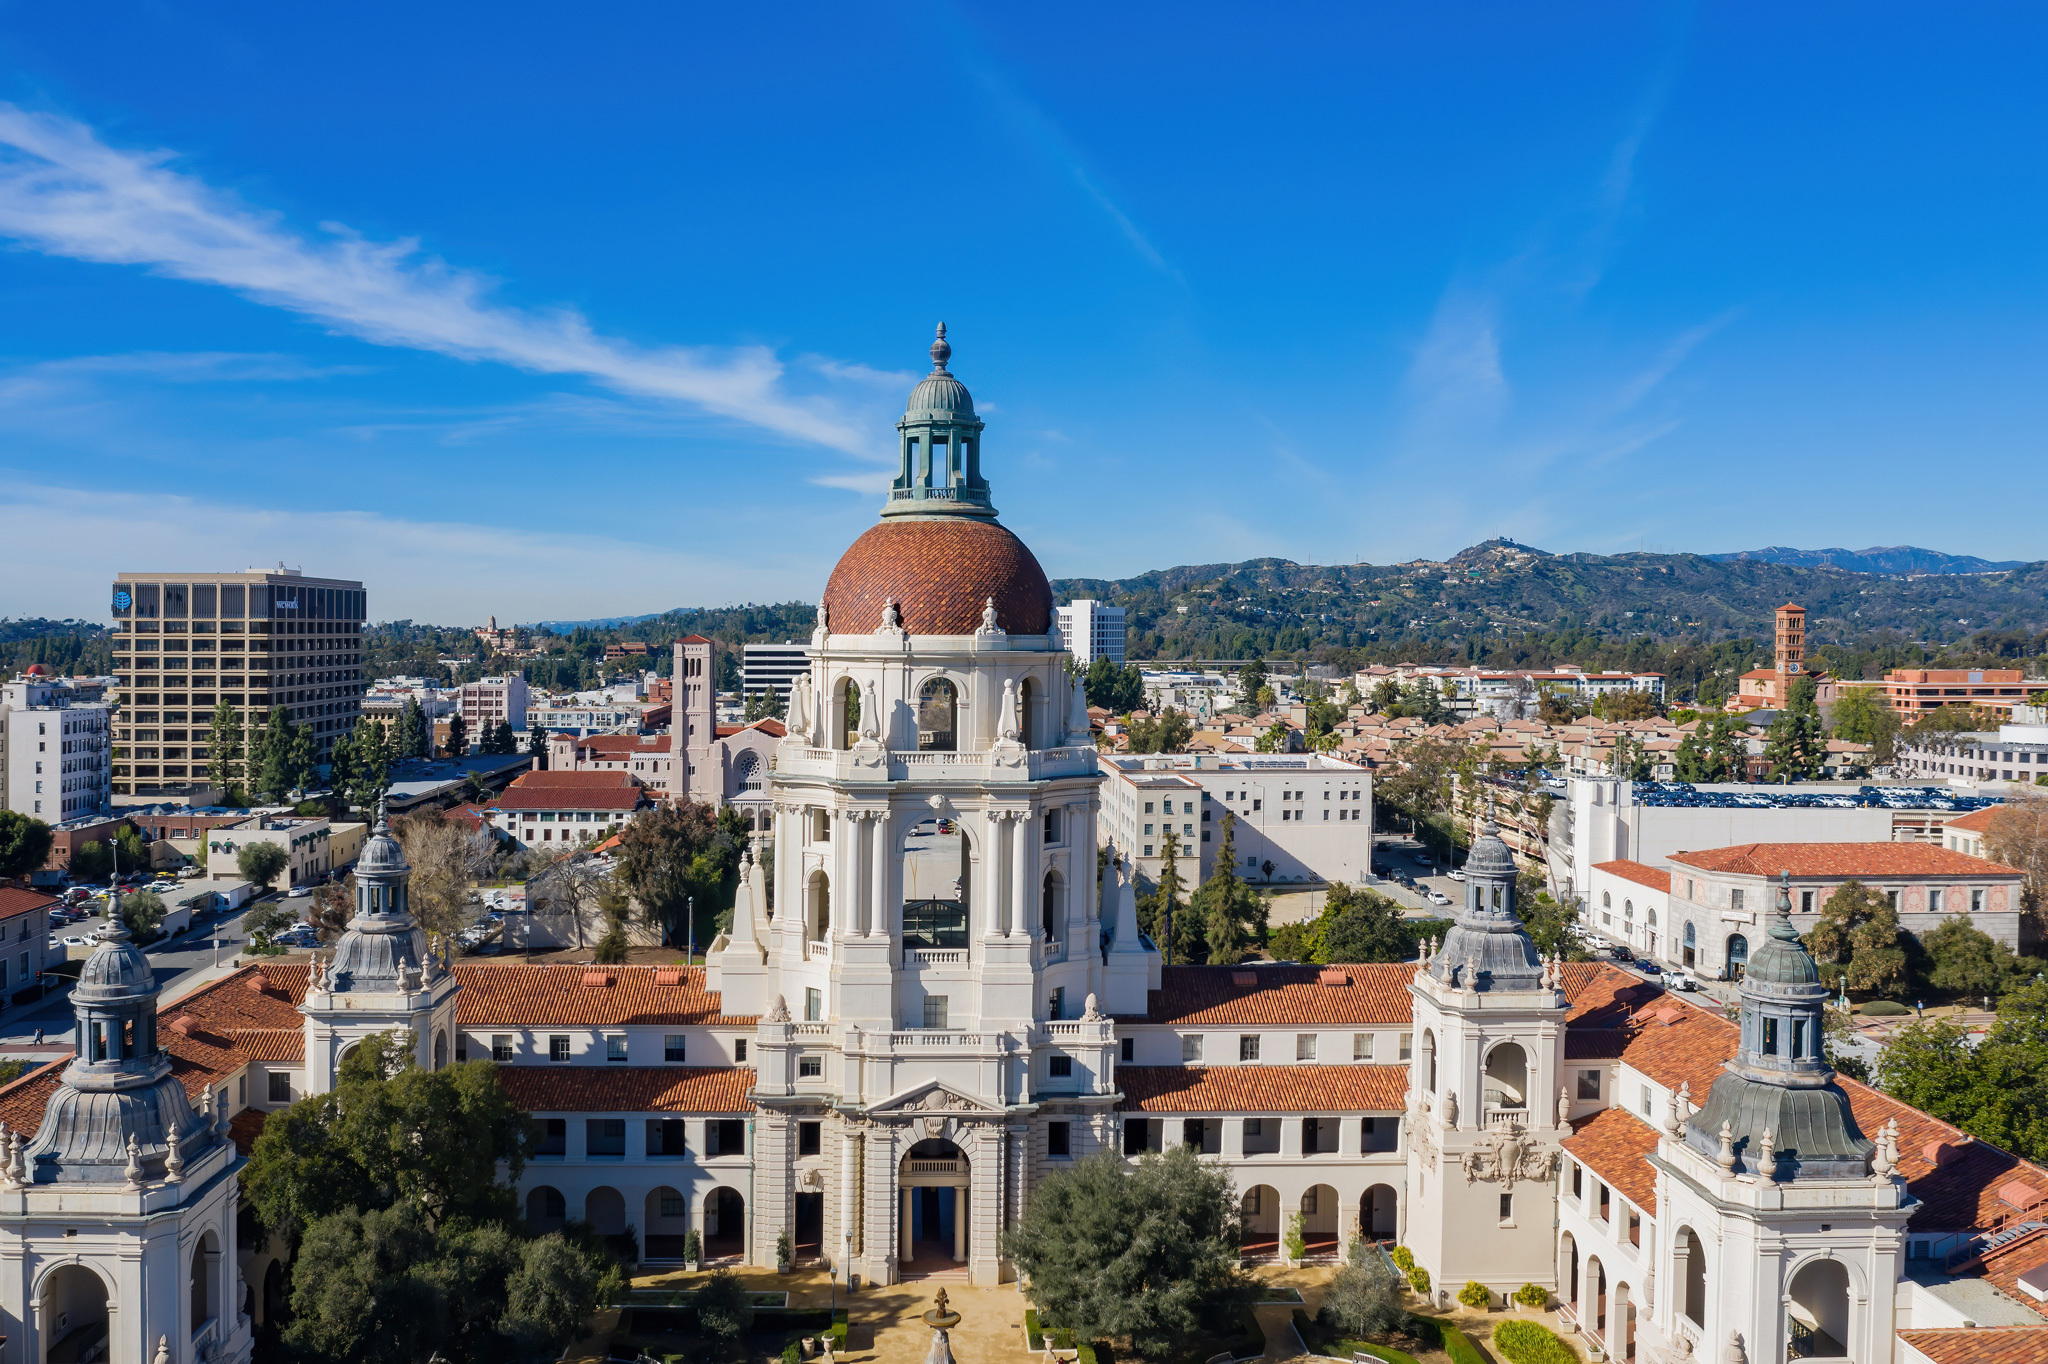 Pasadena, Los Angeles' Neighbor: A Guide to the Scenic City